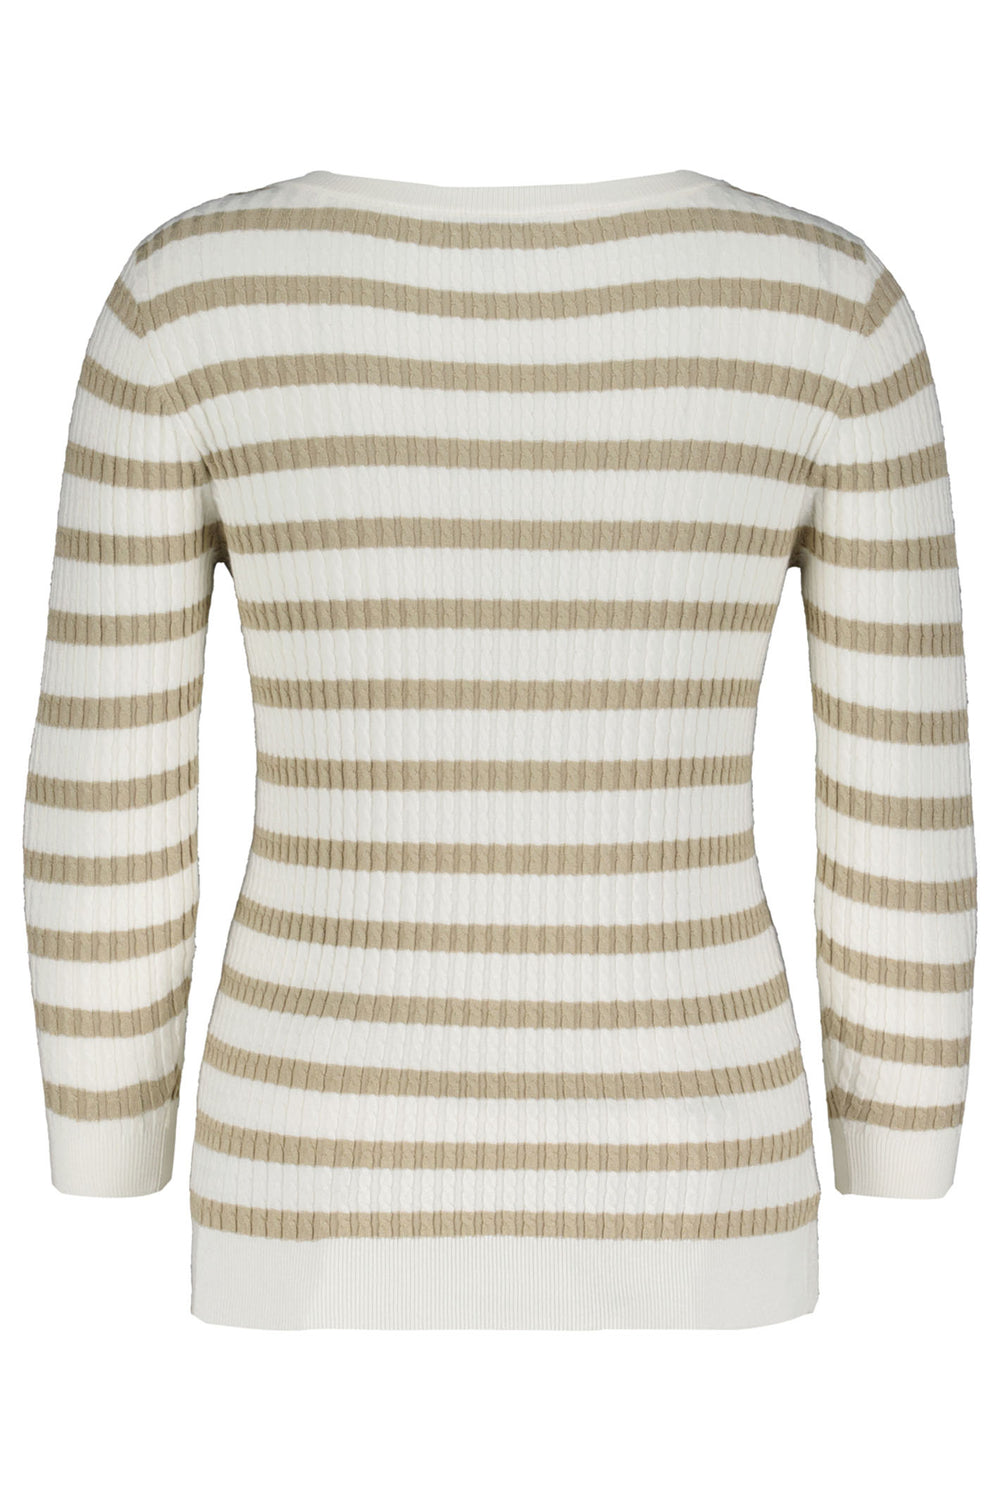 Red Button SRB4195 Stone Beige Stripe Long Sleeve Cable Knit Top - Dotique